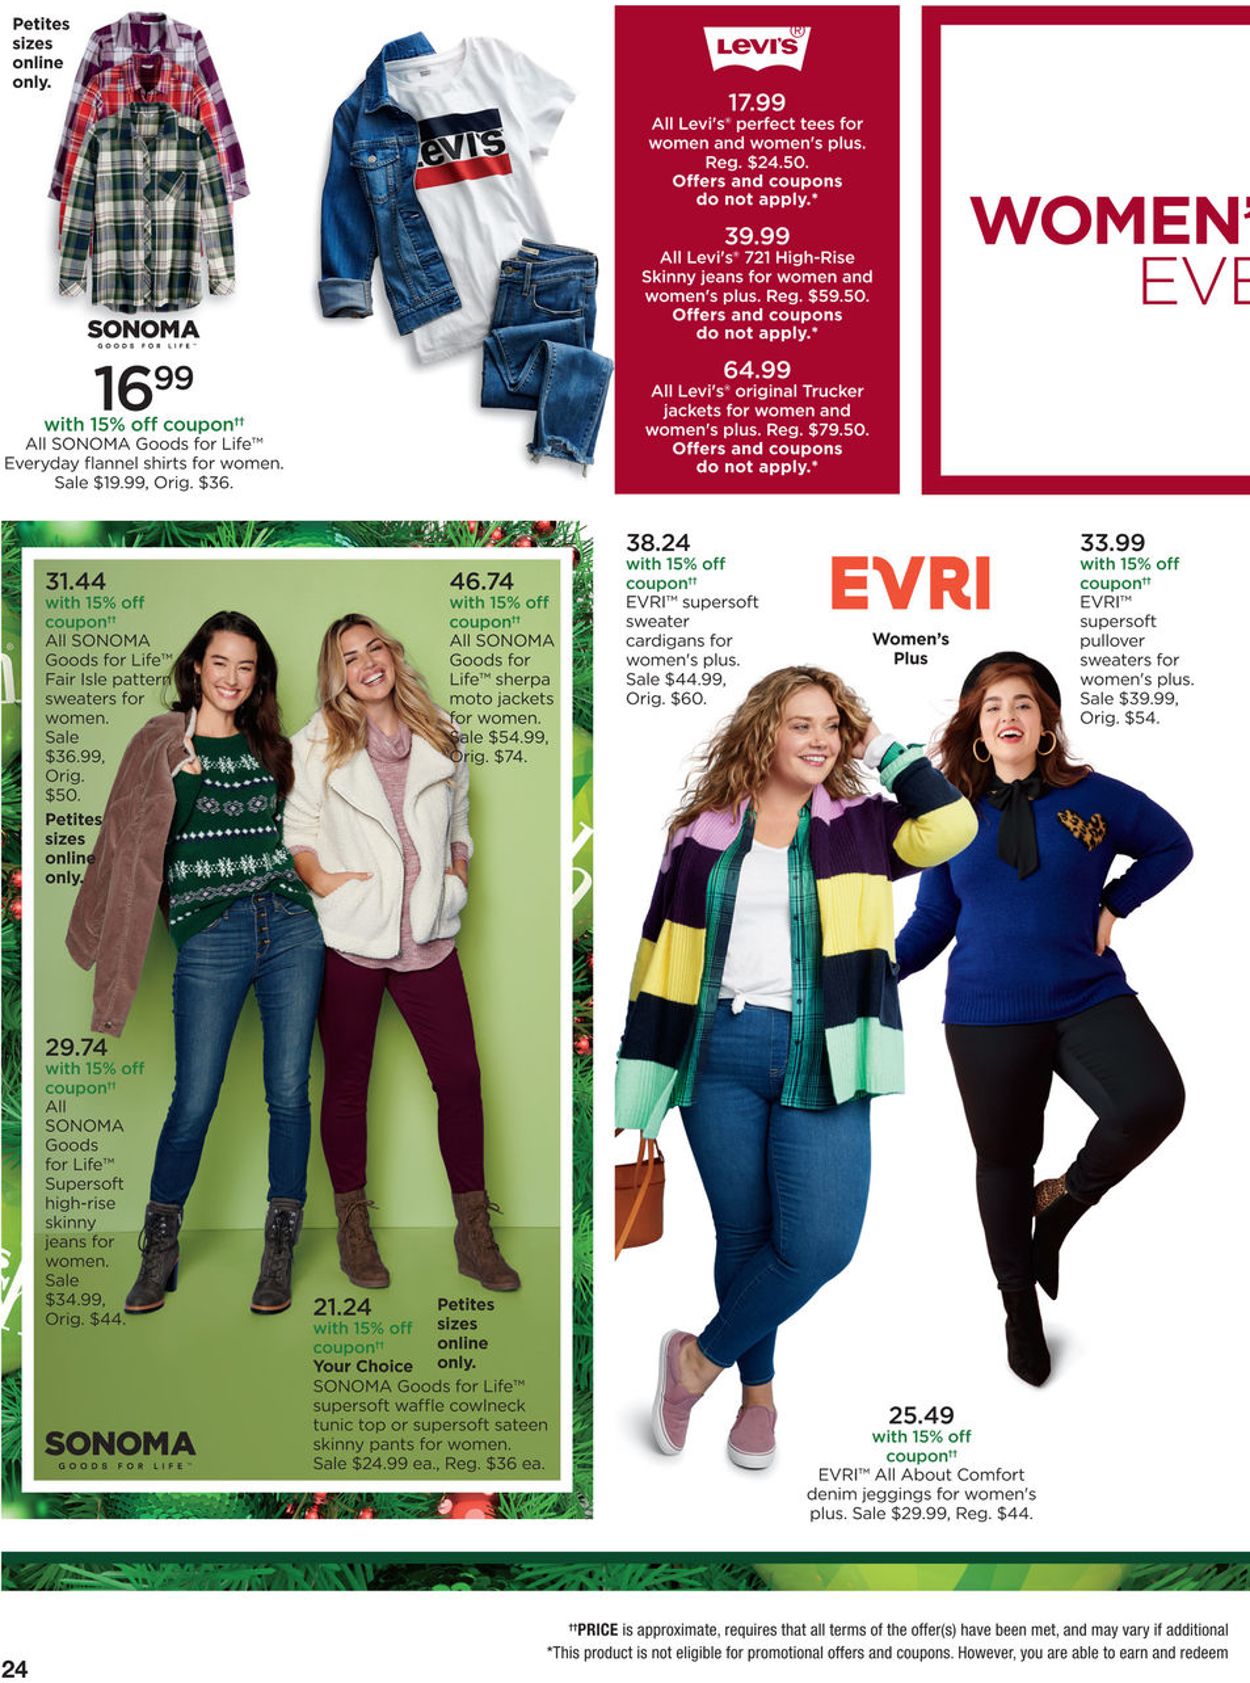 Kohl's Current weekly ad 11/07 - 11/17/2019 [24] - frequent-ads.com